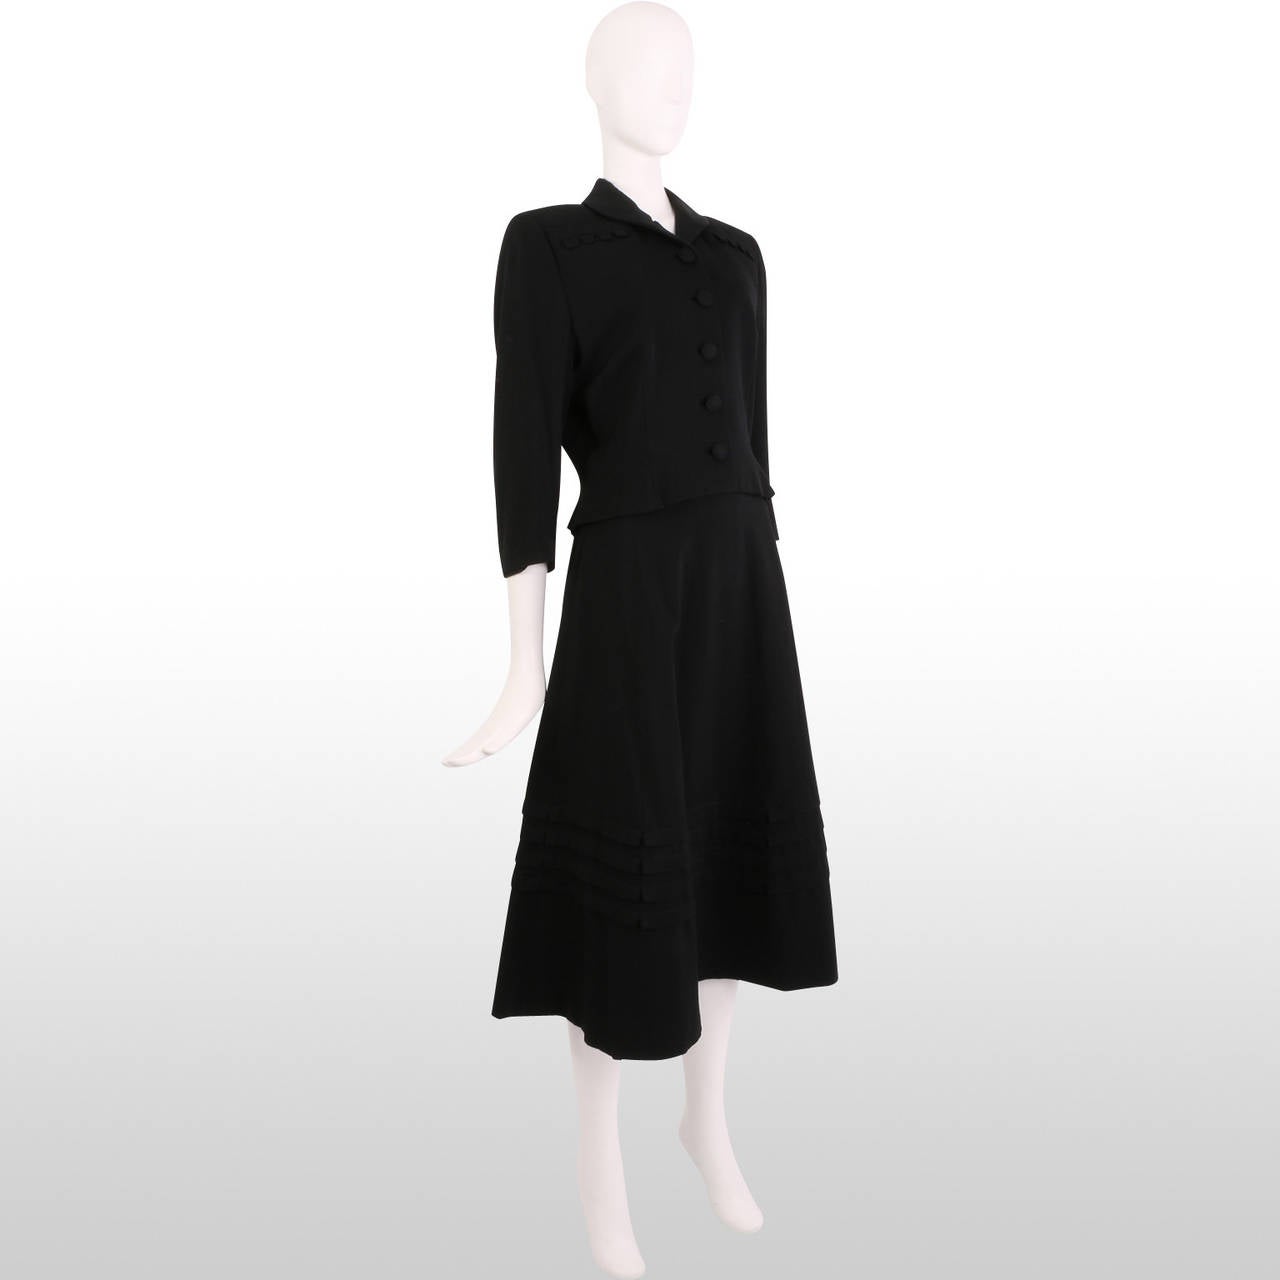 This beautiful black 1940's skirt suit is an original design by a Gathering Goddess favourite, Lilli Ann. It is a beautifully tailored piece made up of a cropped jacket with elegant quarter length sleeves and an A-line skirt which continues the pin